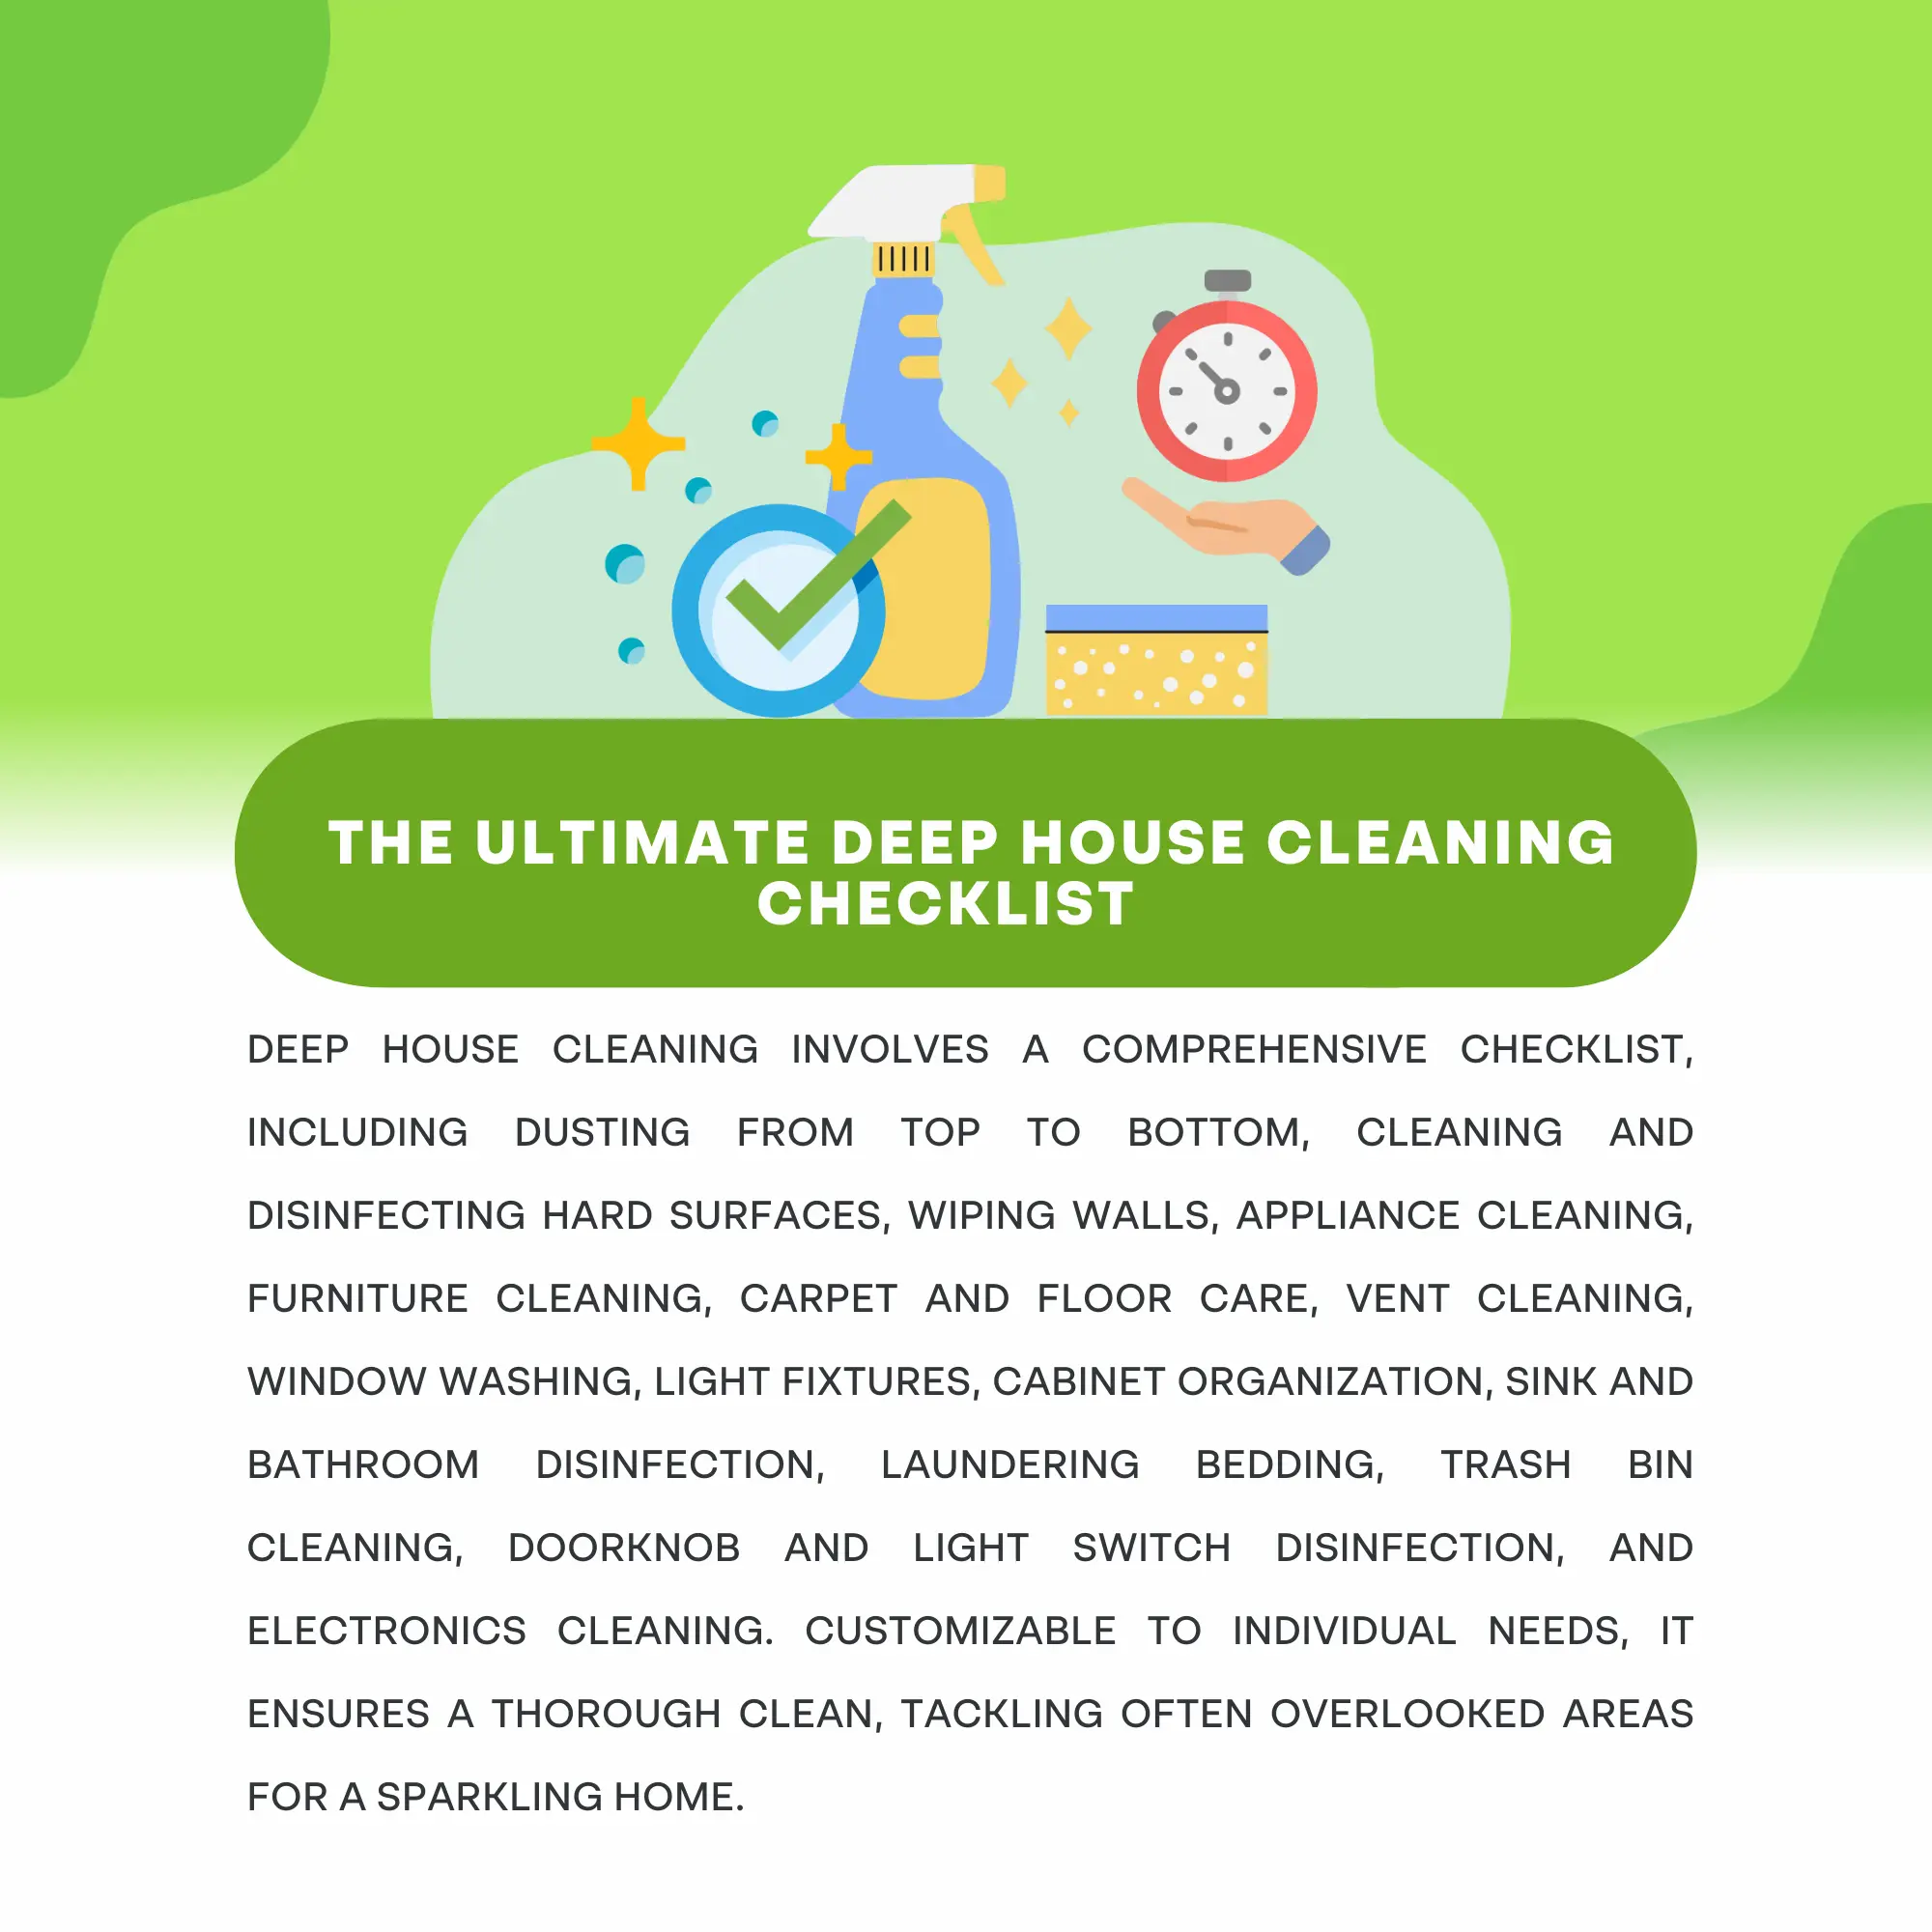 The Ultimate Deep House Cleaning Checklist